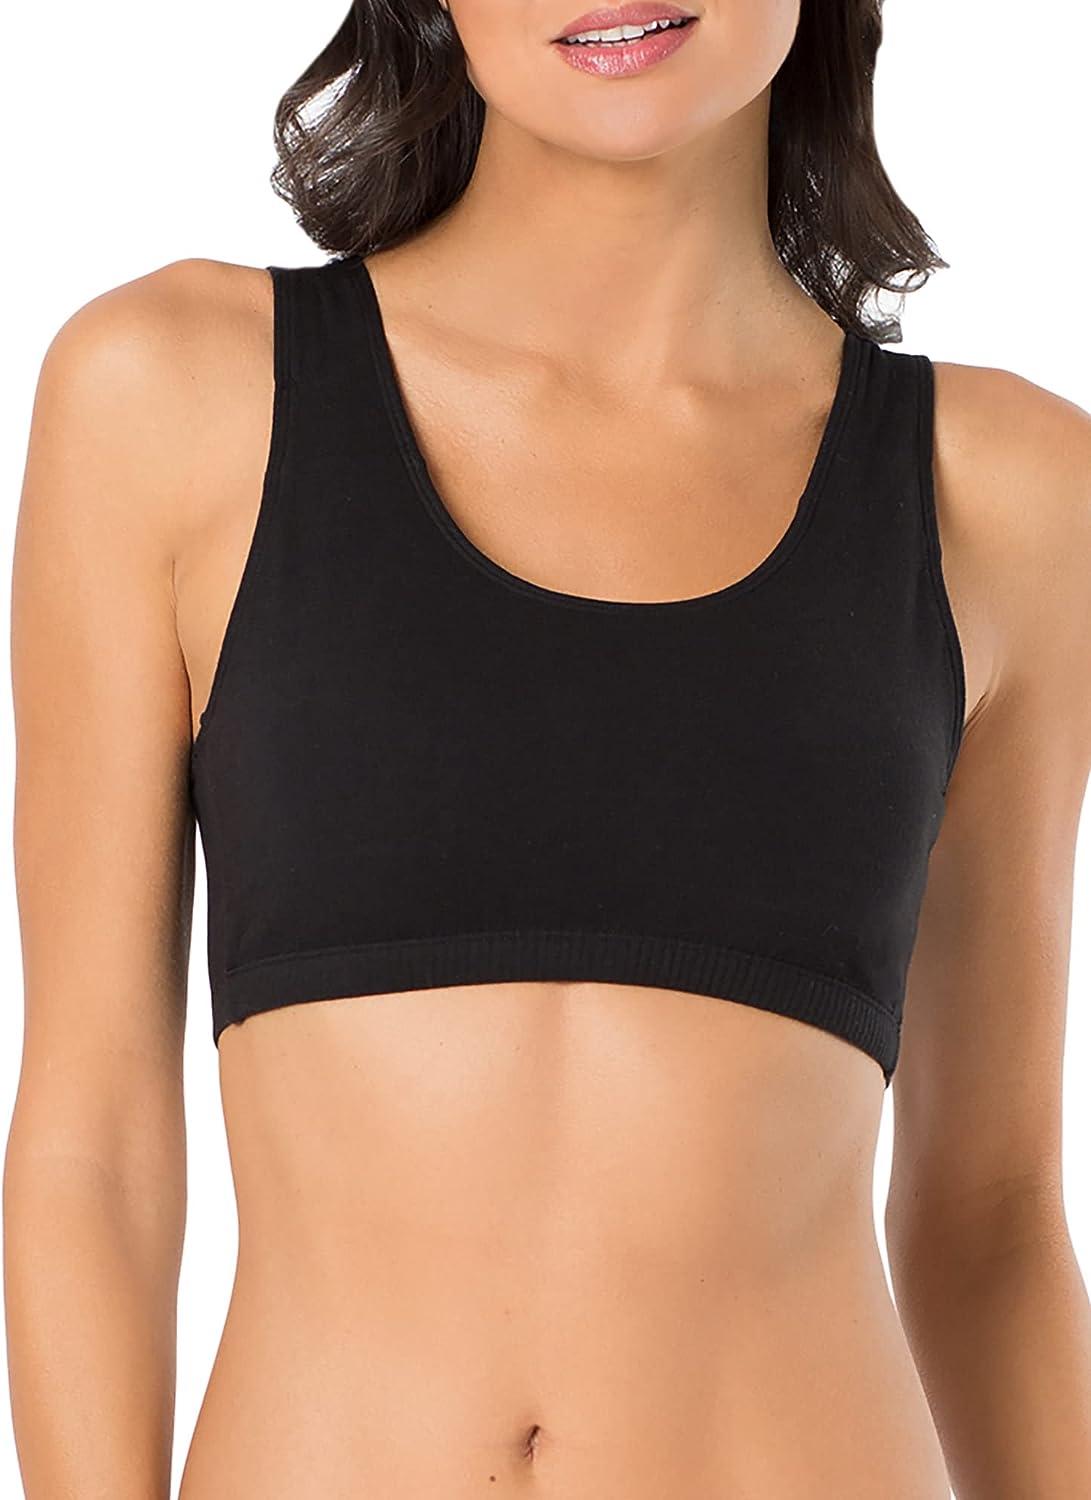 Fruit of the Loom Women's Built Up Tank Style Sports Bra Value Pack  Black/White/White/Heather Grey 4-pack 42